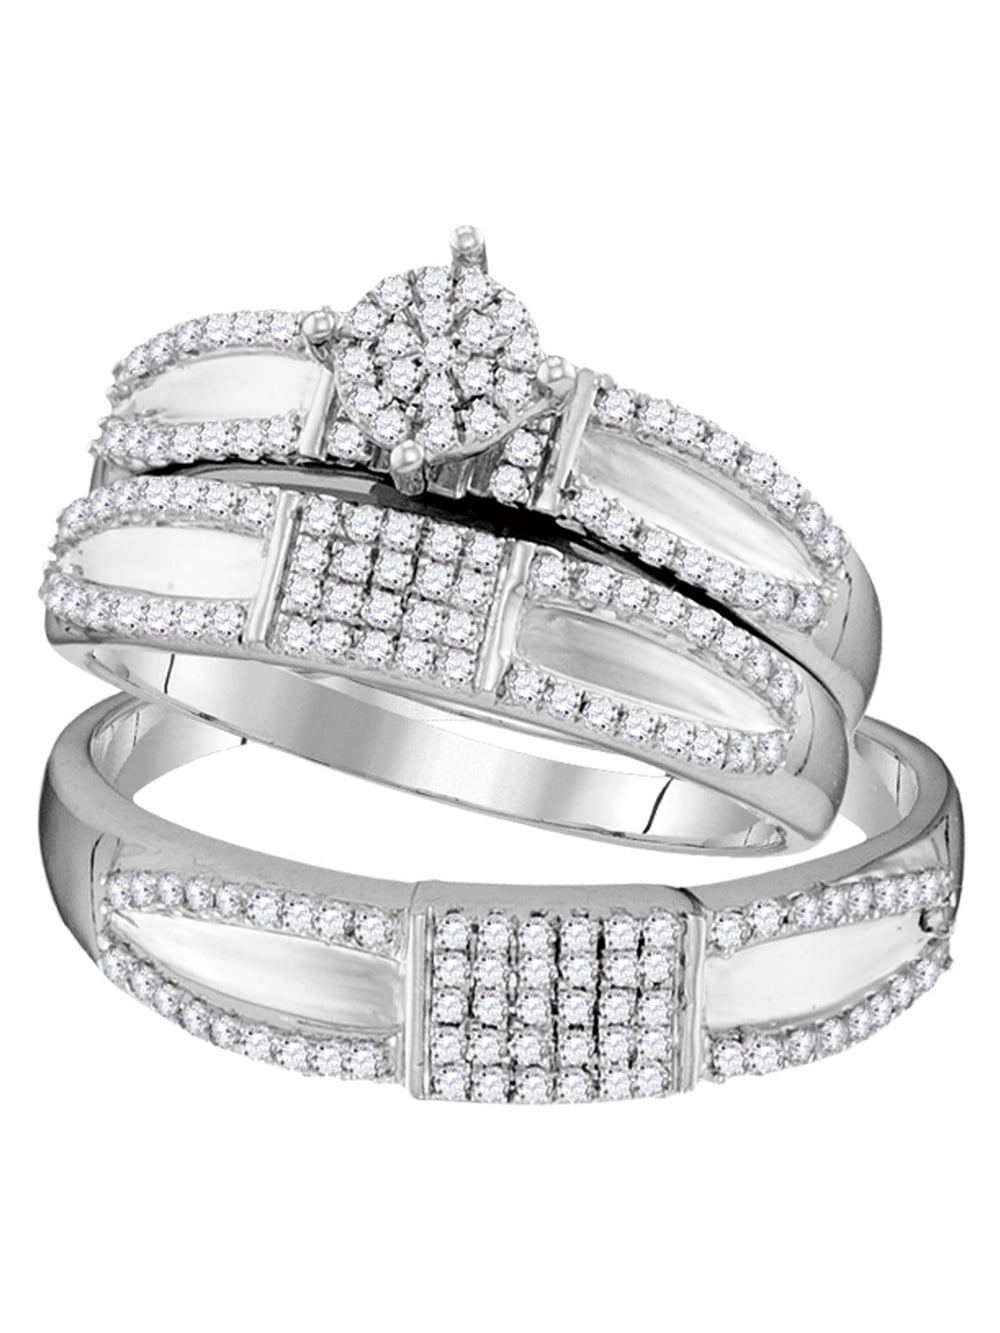 Details about   3.50 Ct Marquise Cut Diamond Bridal Engagement Wedding Ring Set 14K White Gold